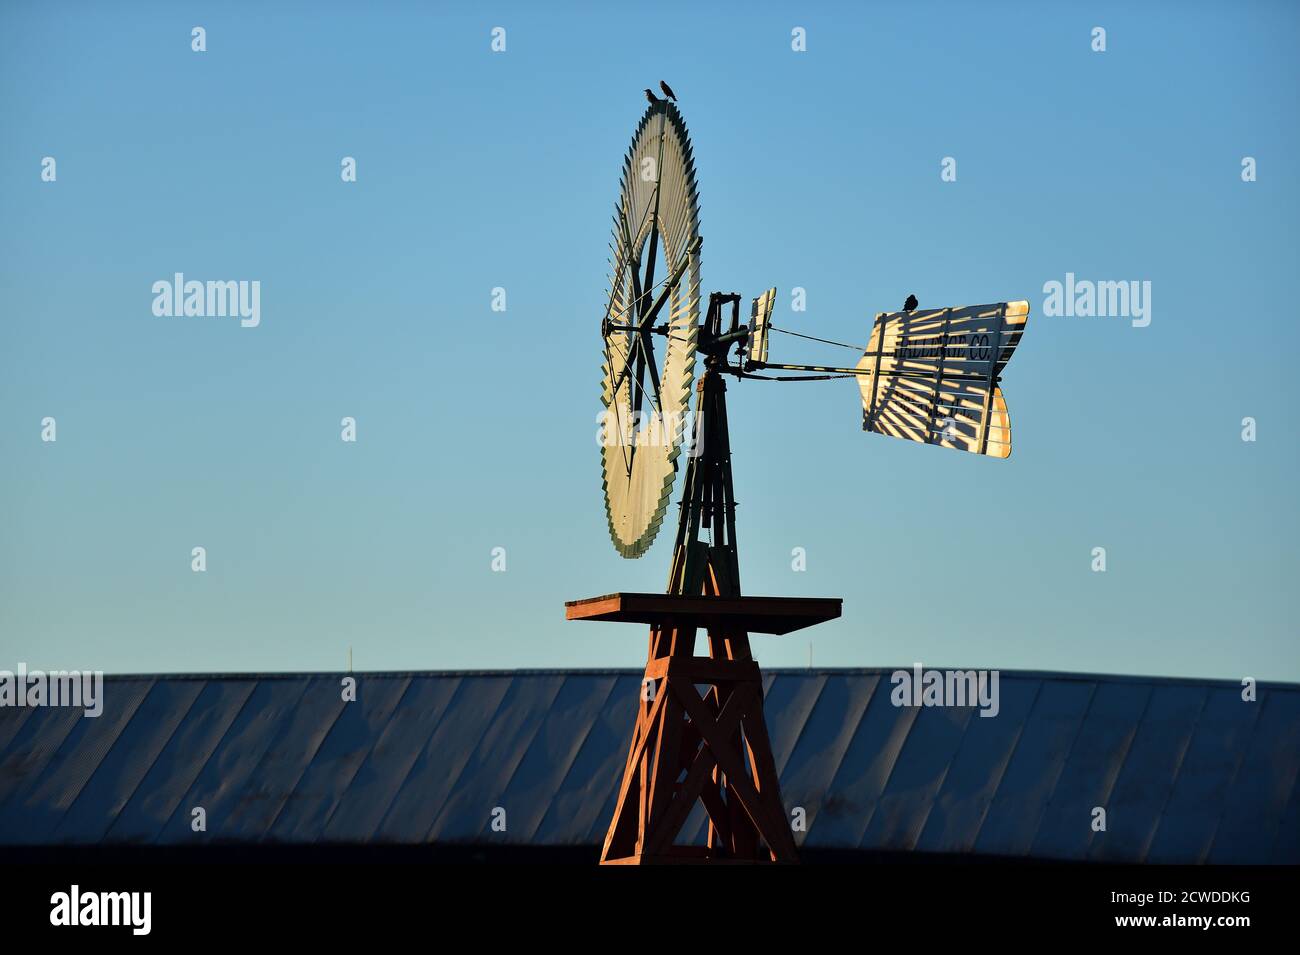 Hampshre, Illinois, USA. A windmill on a northeastern Illinois farm. The wheel and direction device were once very common. Stock Photo